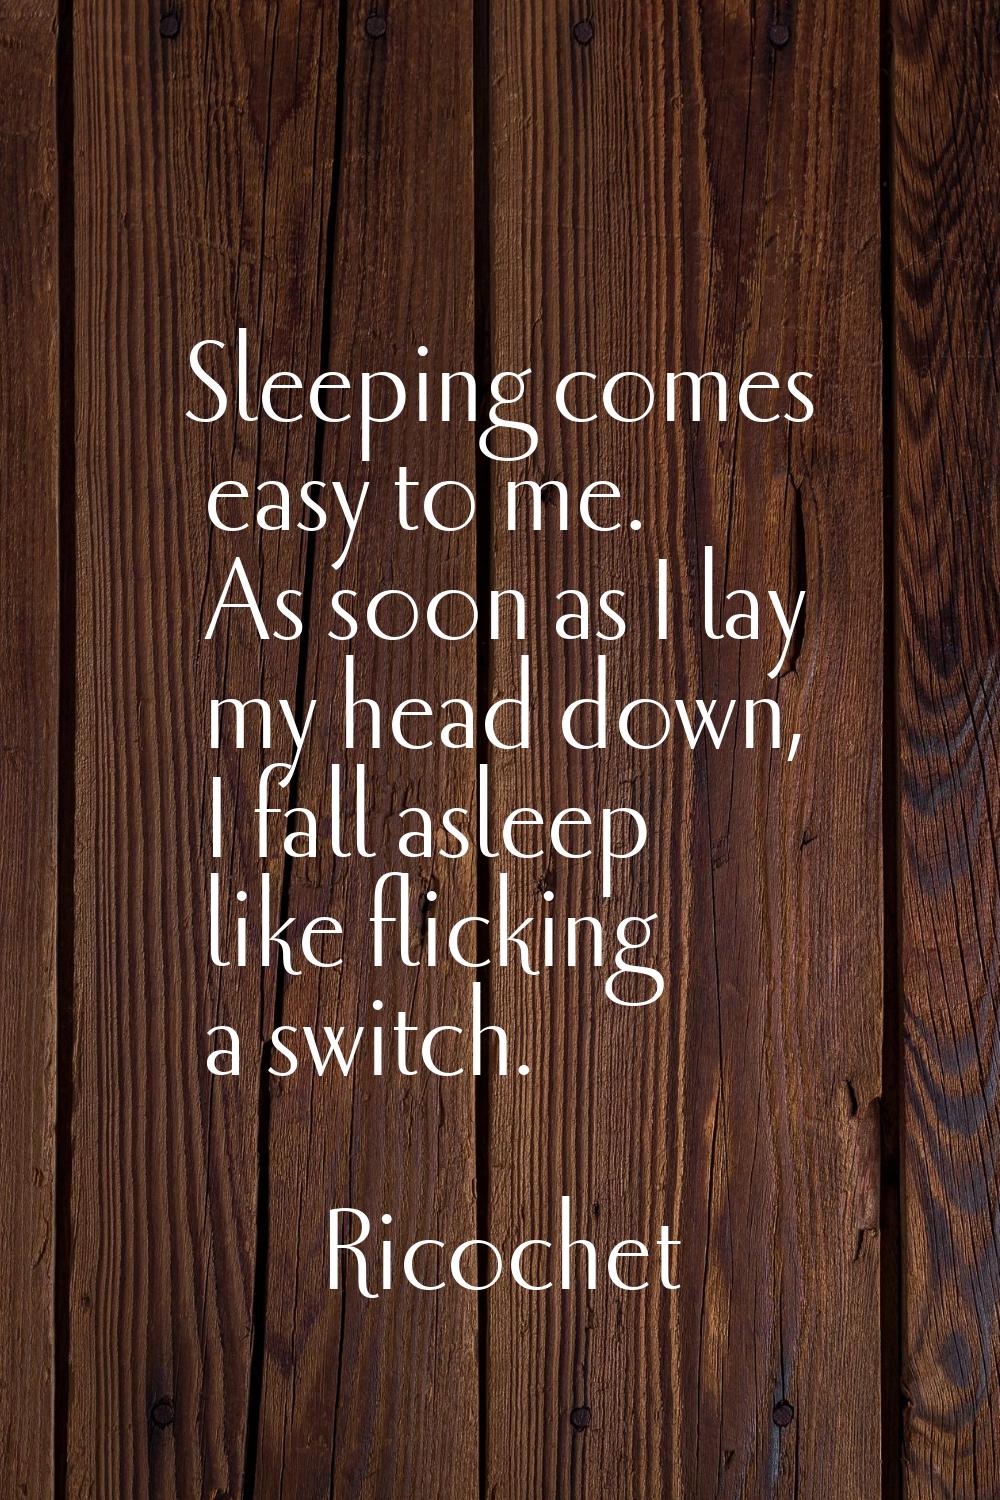 Sleeping comes easy to me. As soon as I lay my head down, I fall asleep like flicking a switch.